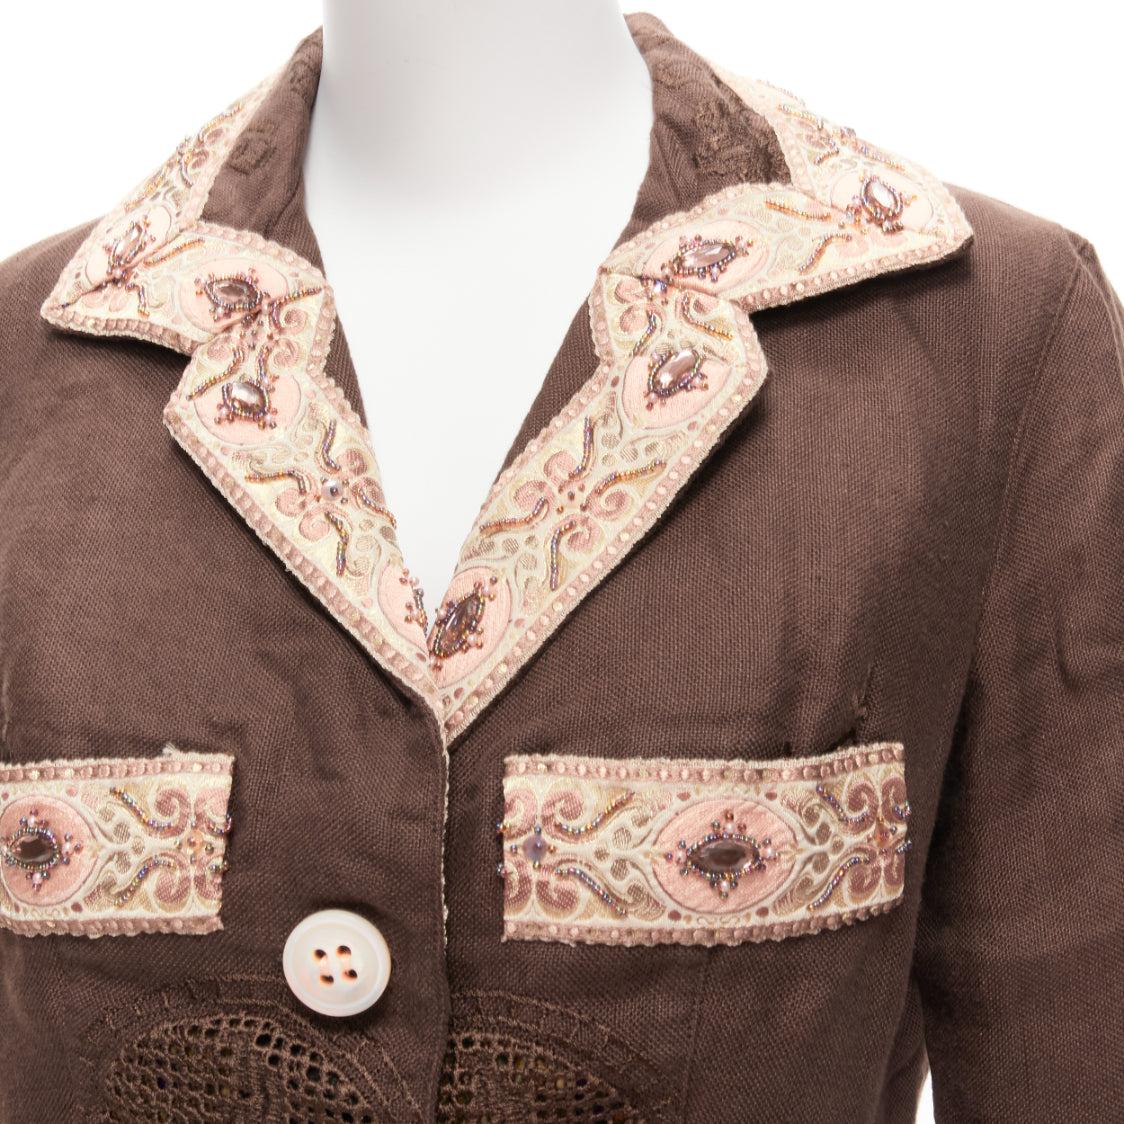 VOYAGE INVEST IN THE ORIGINAL LONDON beige embroidery beaded brown linen cotton blazer M
Reference: GIYG/A00320
Brand: VOYAGE INVEST IN THE ORIGINAL LONDON
Material: Linen, Cotton
Color: Brown, Beige
Pattern: Solid
Closure: Button
Lining: